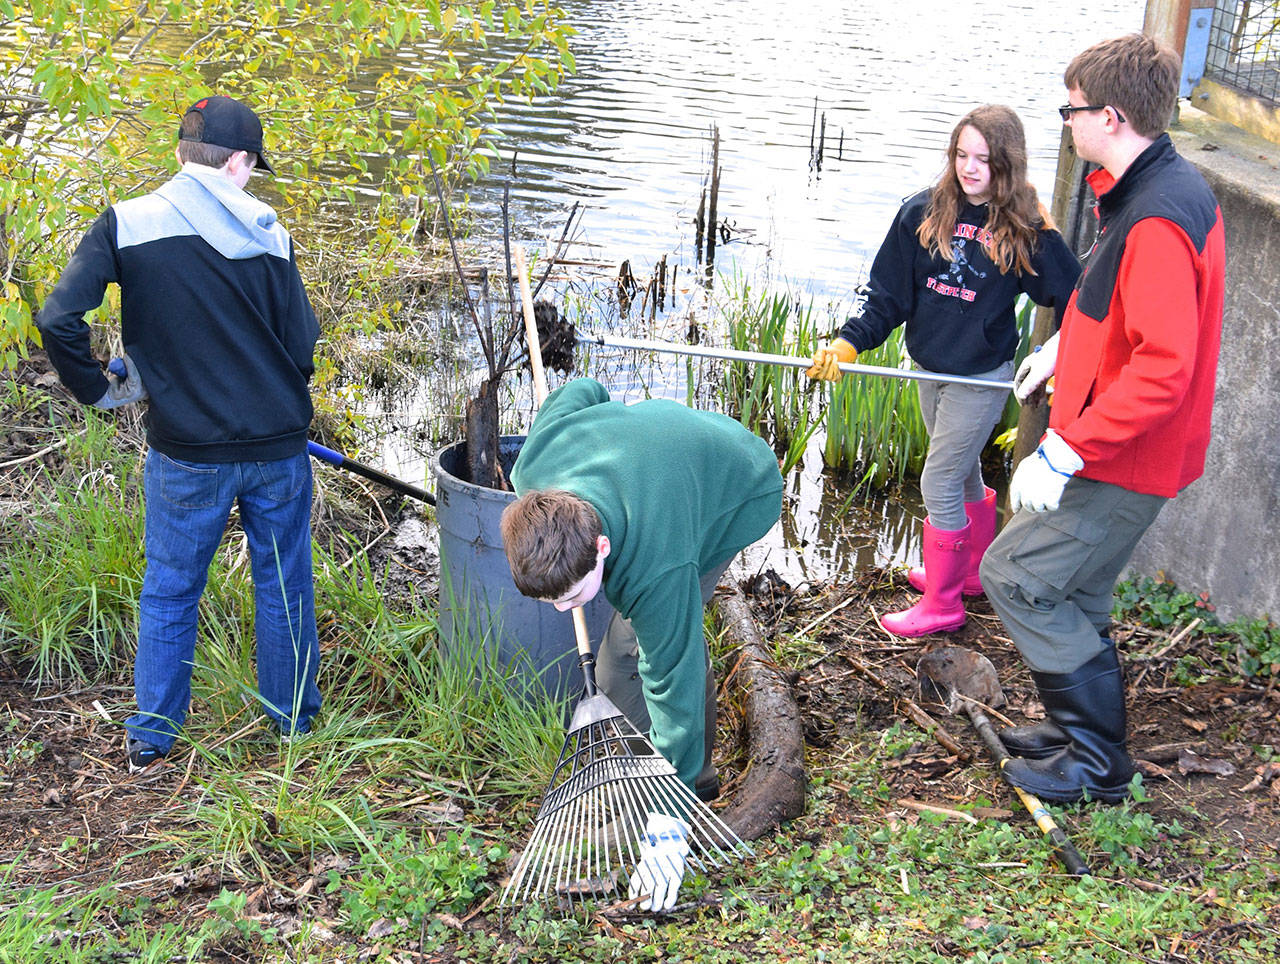 Boy Scout Troop 401 works to beautify at Mill Pond Park. RACHEL CIAMPI, Auburn Reporter